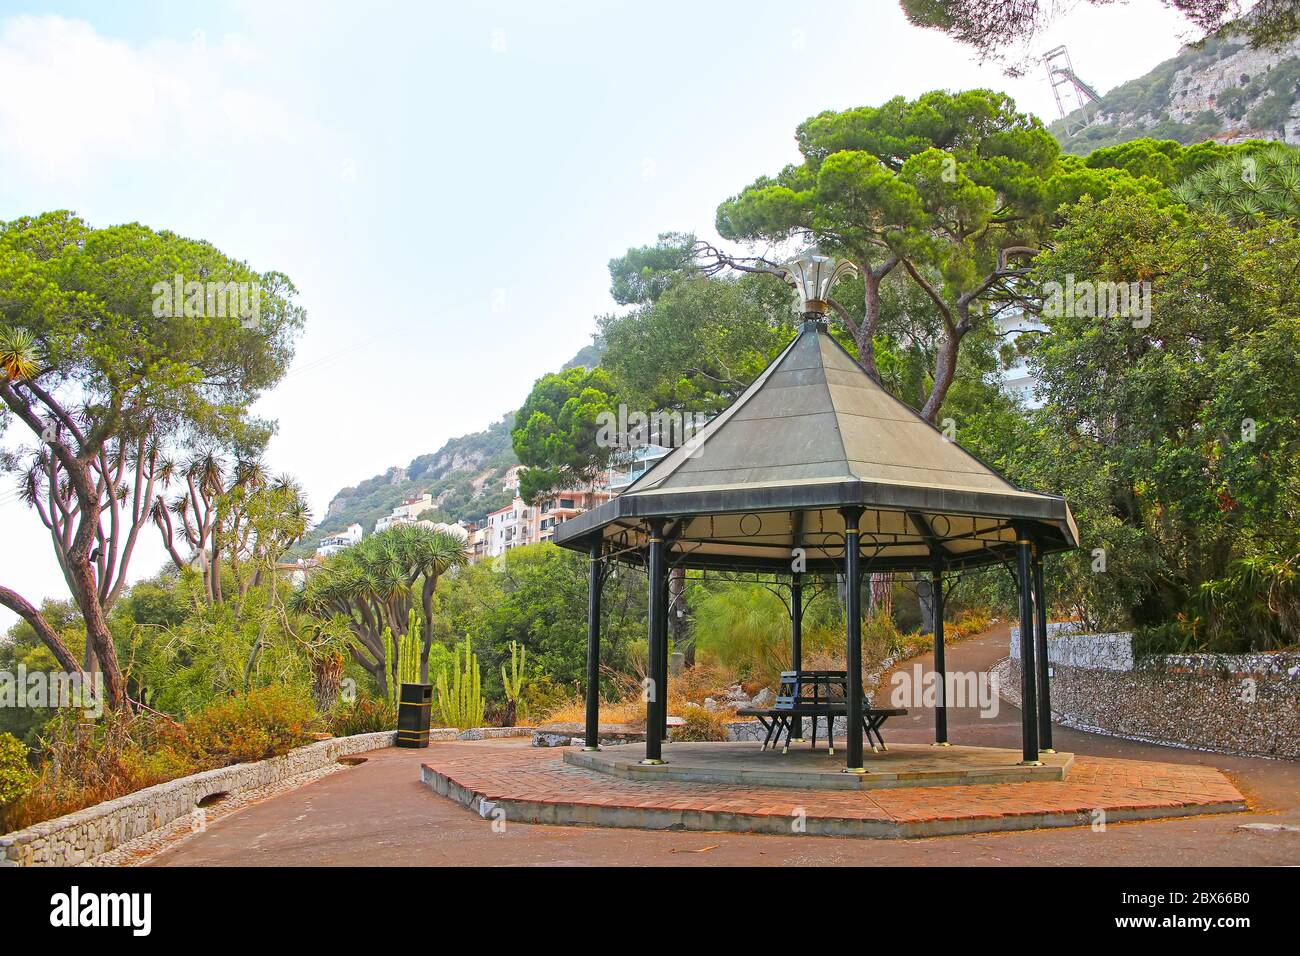 Pagoda the park with Canary Islands Dragon Tree & other plants inside the La Alameda botanical Gardens, Gibraltar, British overseas territory. Stock Photo